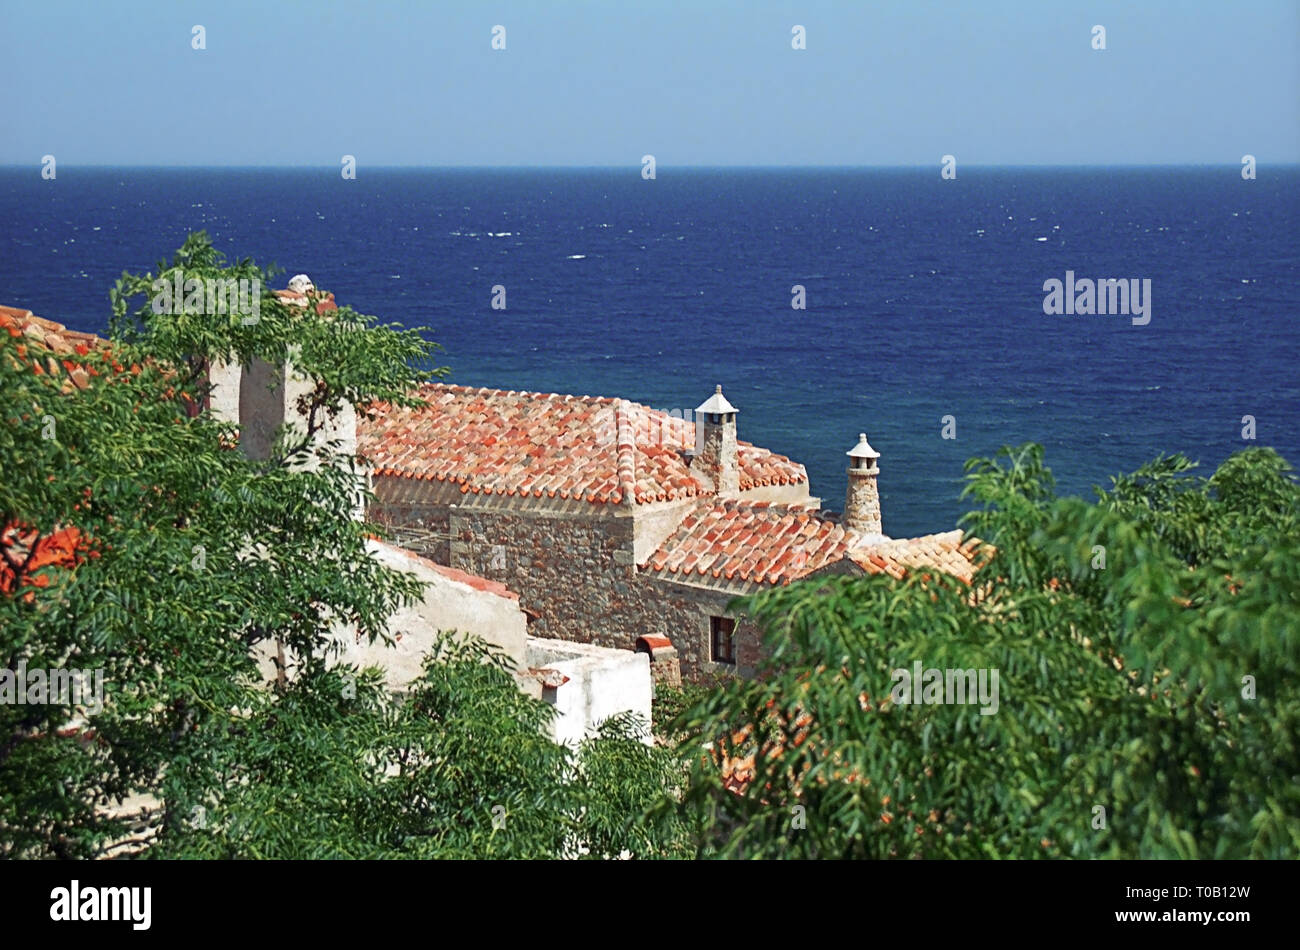 Tiled rooftops in the Lower Town overlooking the sea, Monemvassia, Laconia, Greece Stock Photo